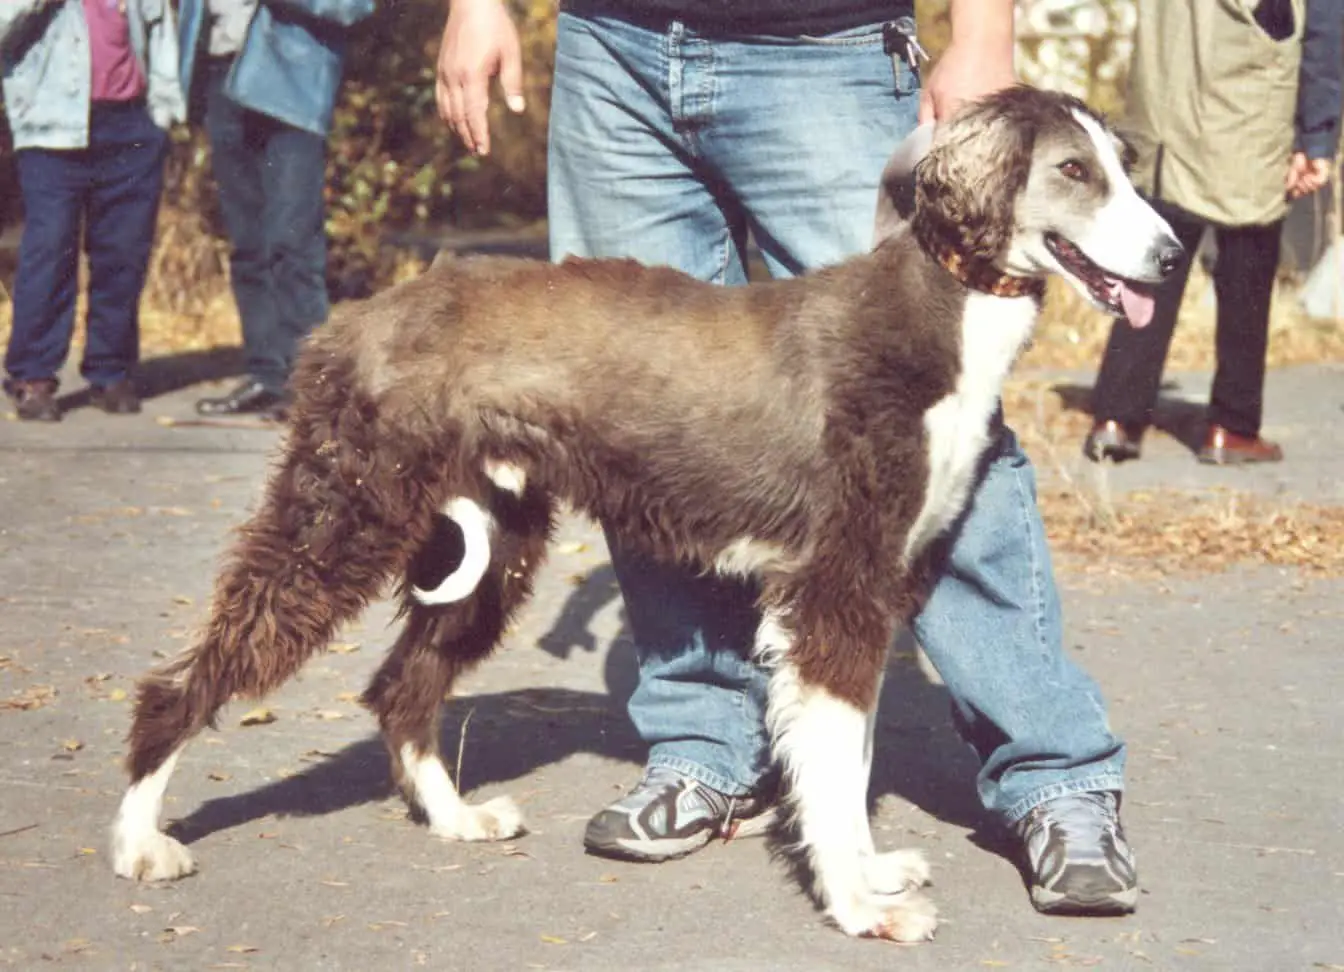 Taigan Dog with owner